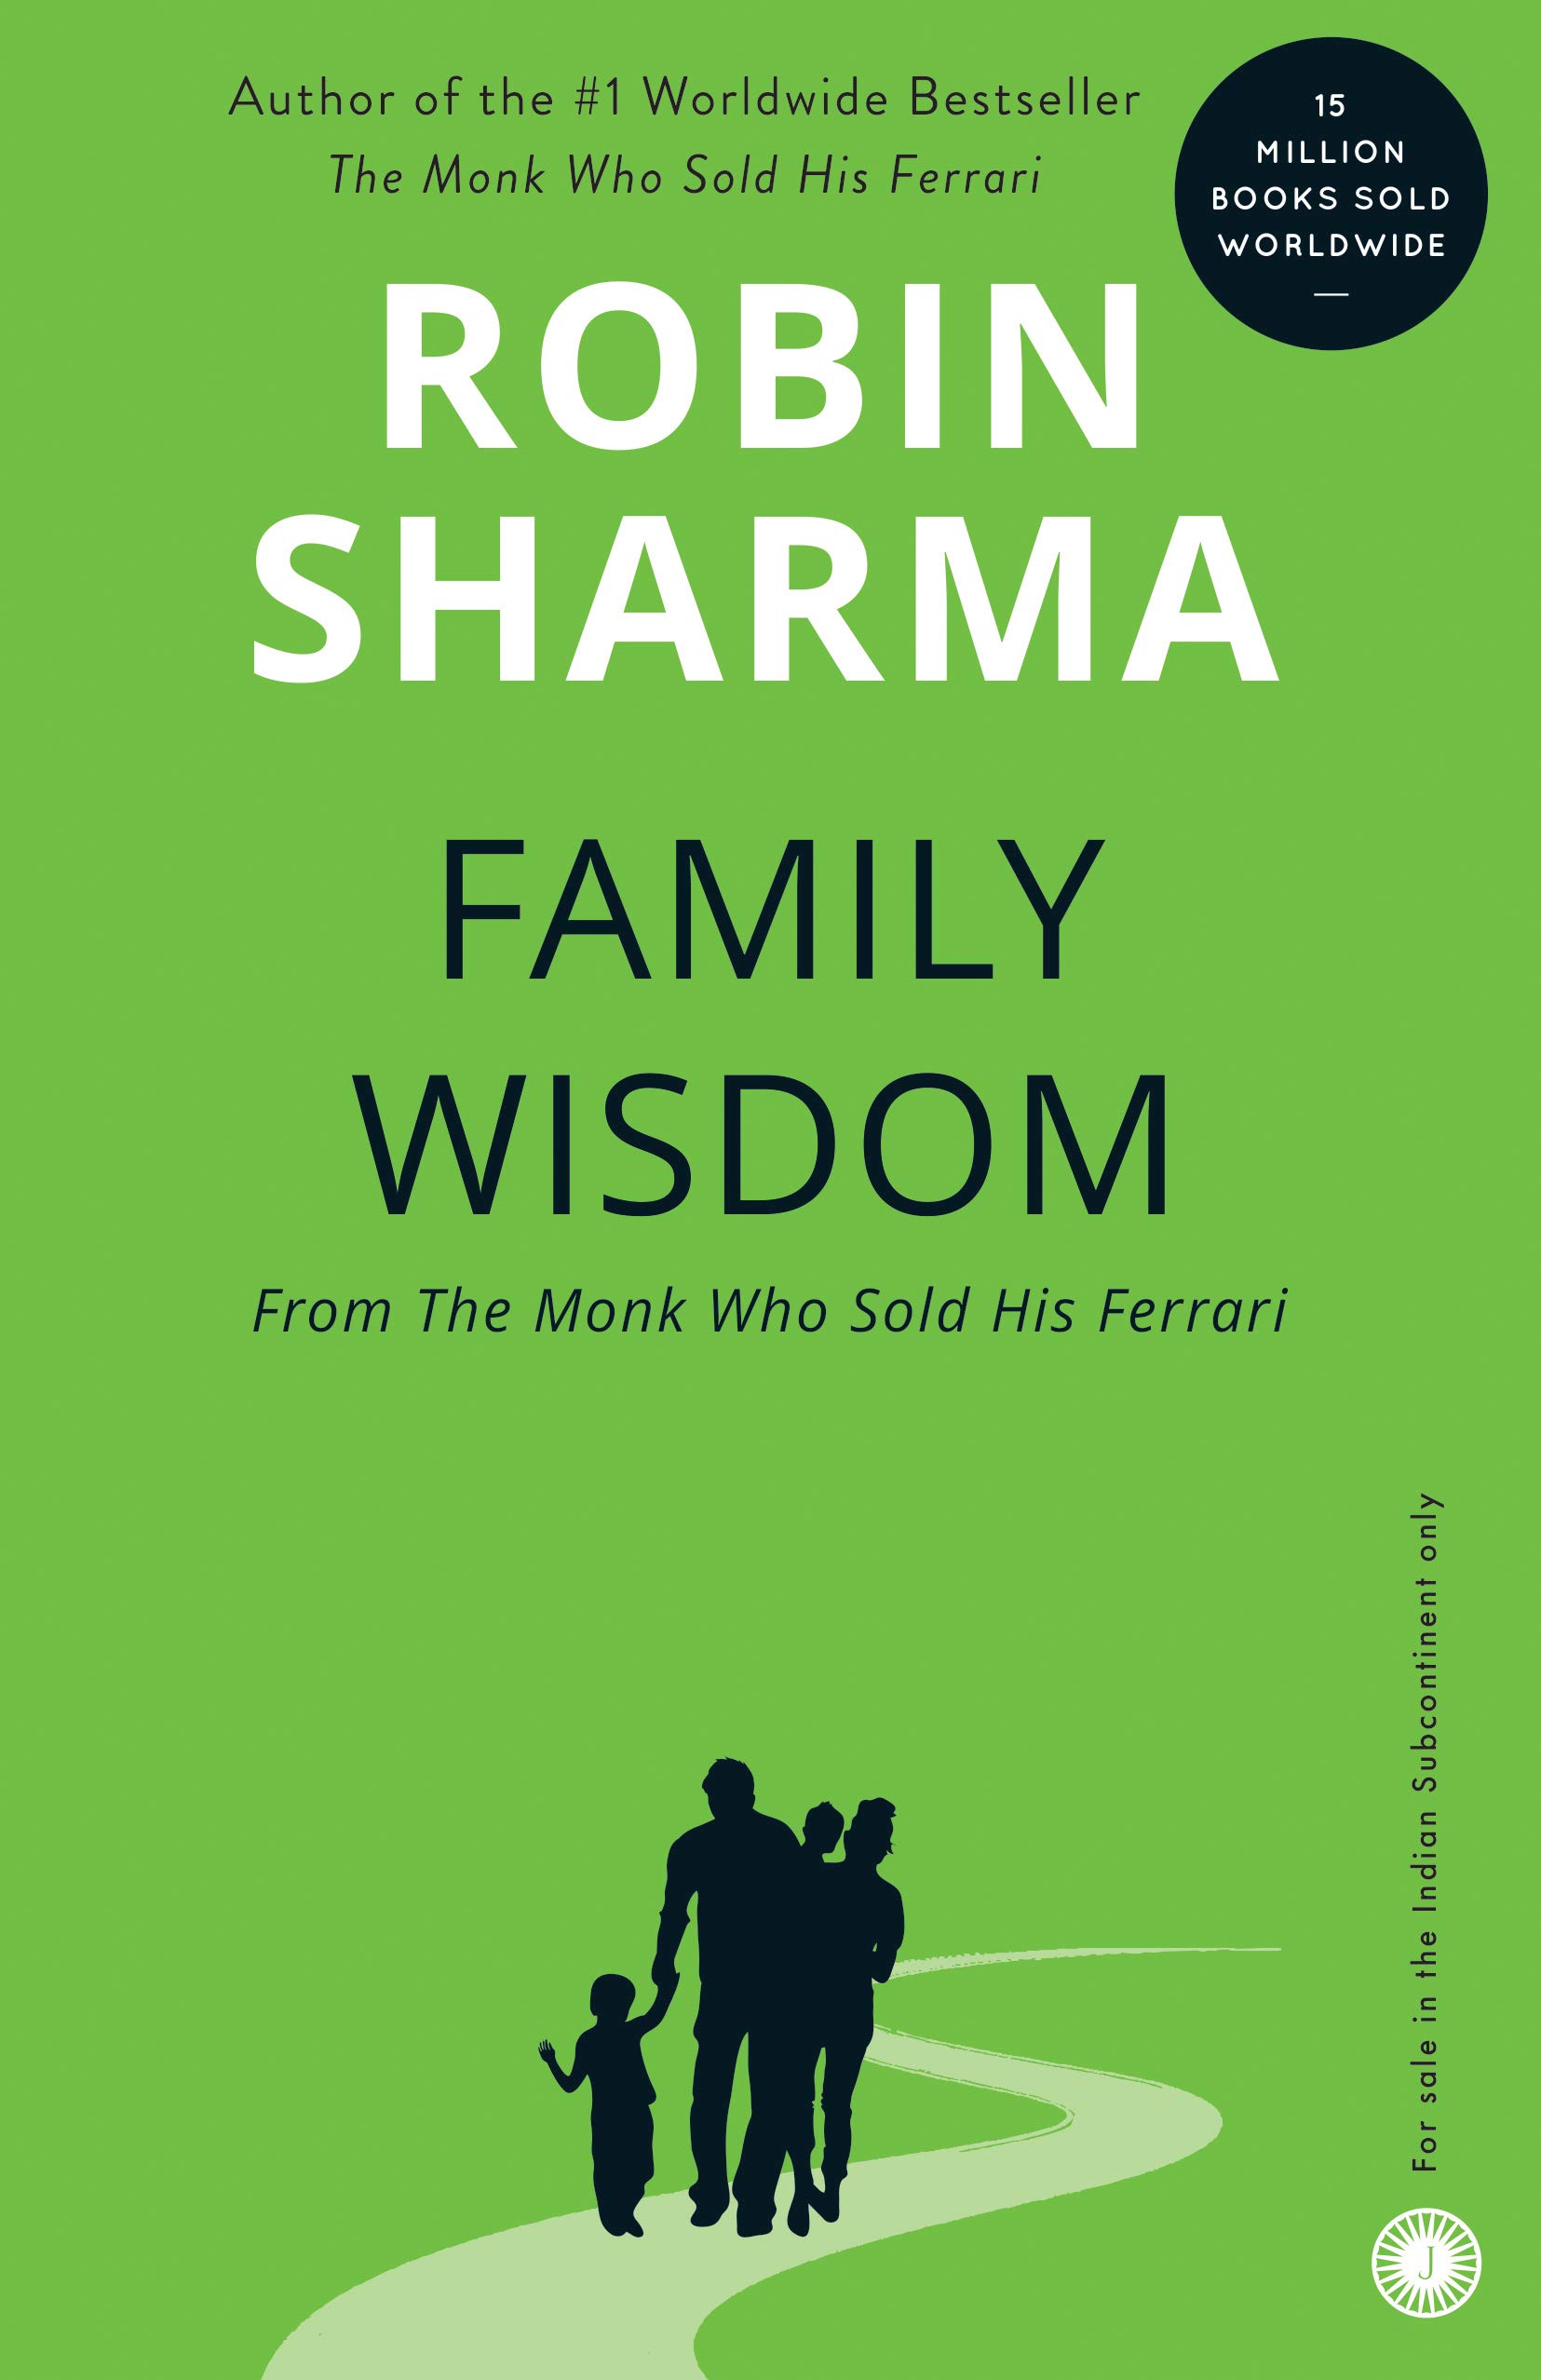 FAMILY WISDOM (FROM THE MONK WHO SOLD HIS FERRARI)